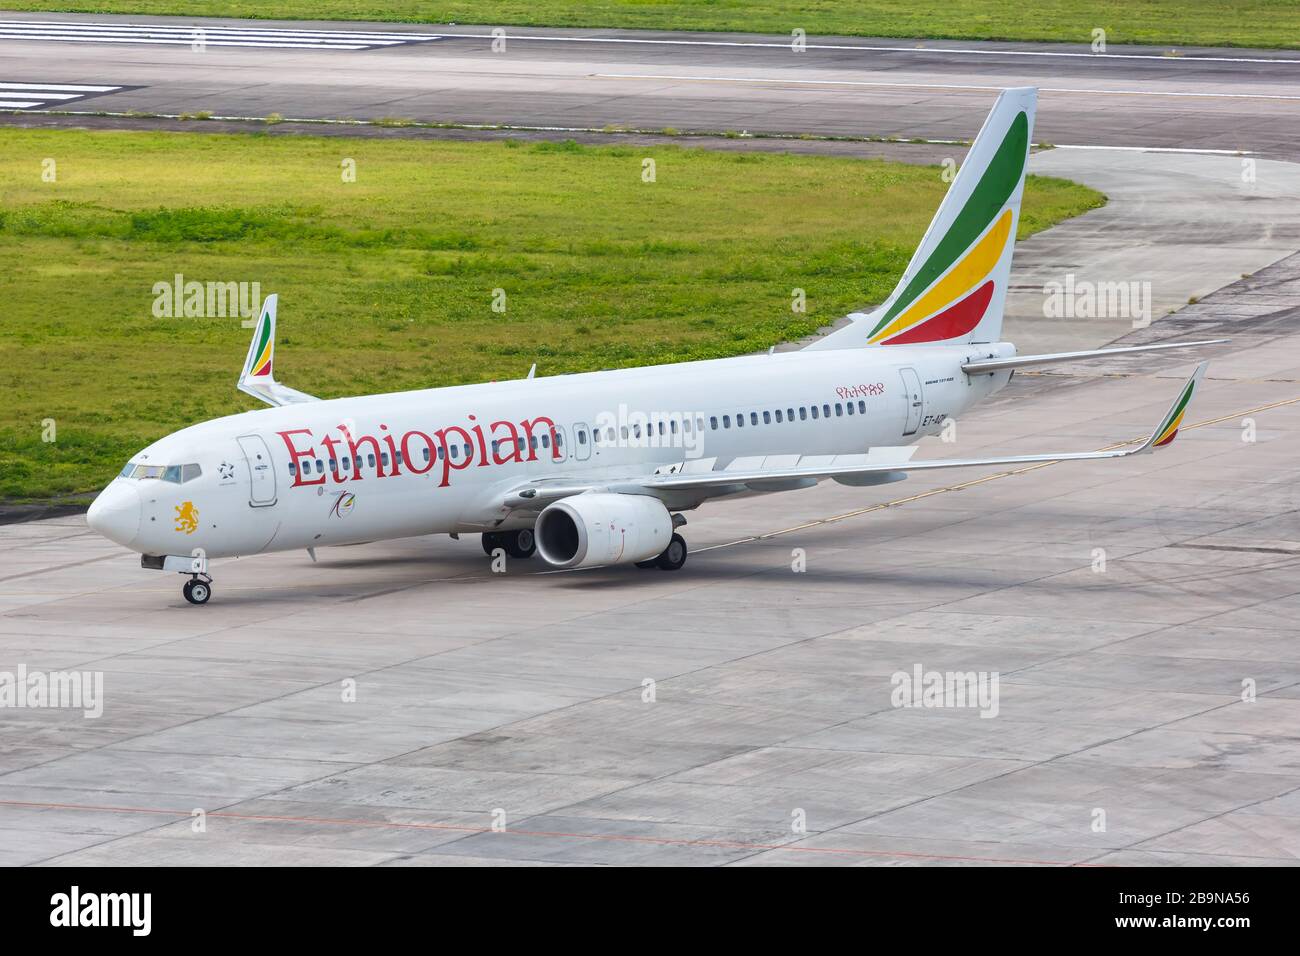 Mahe, Seychelles – February 8, 2020: Ethiopian Boeing 737-800 airplane at Mahe airport (SEZ) in the Seychelles. Boeing is an American aircraft manufac Stock Photo